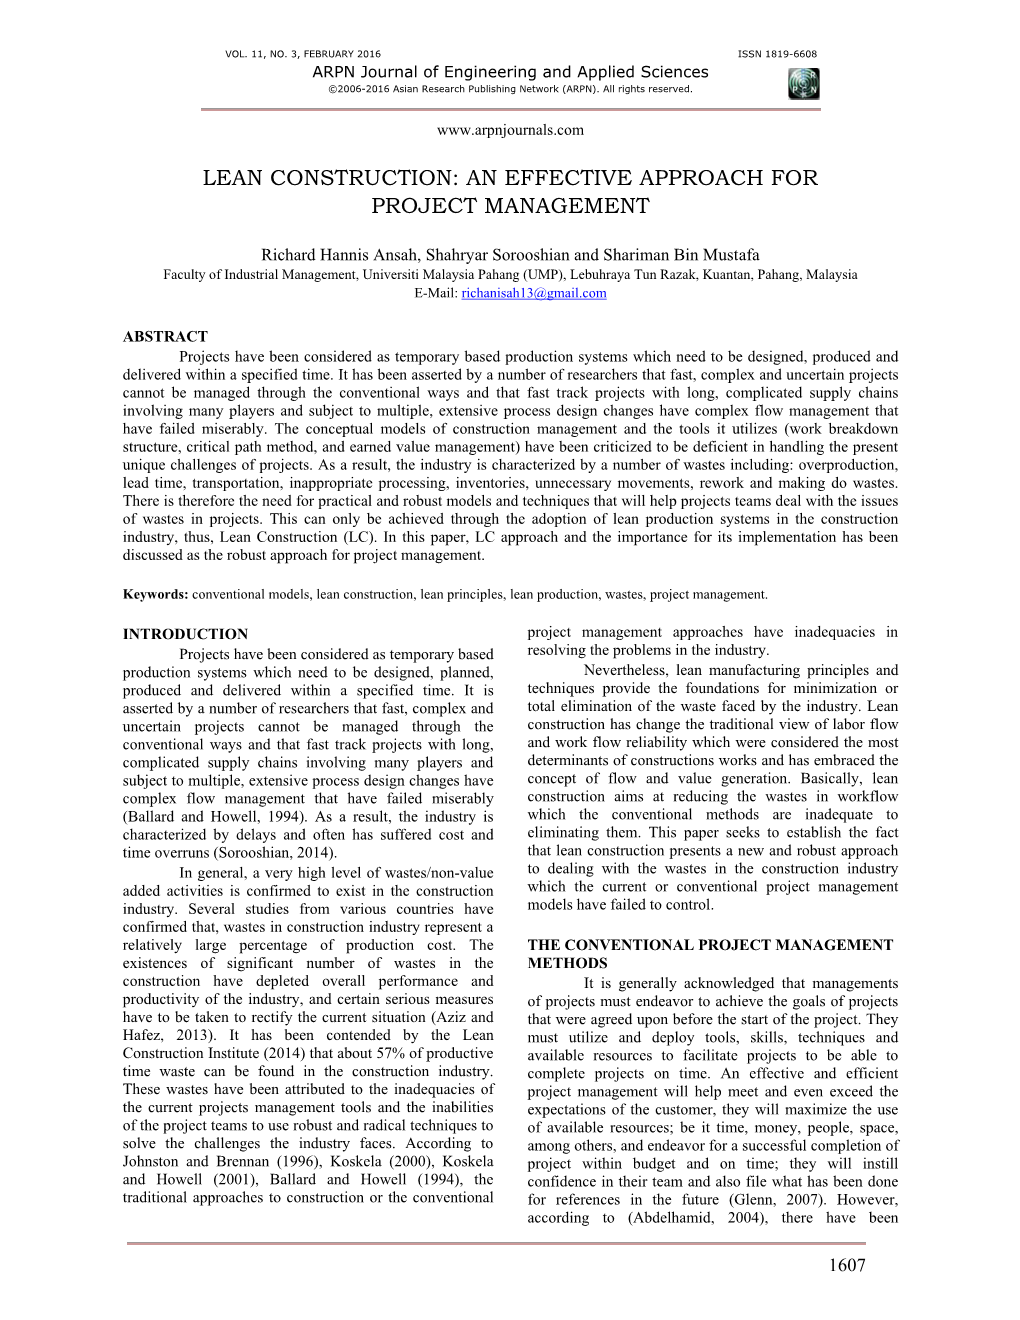 Lean Construction: an Effective Approach for Project Management